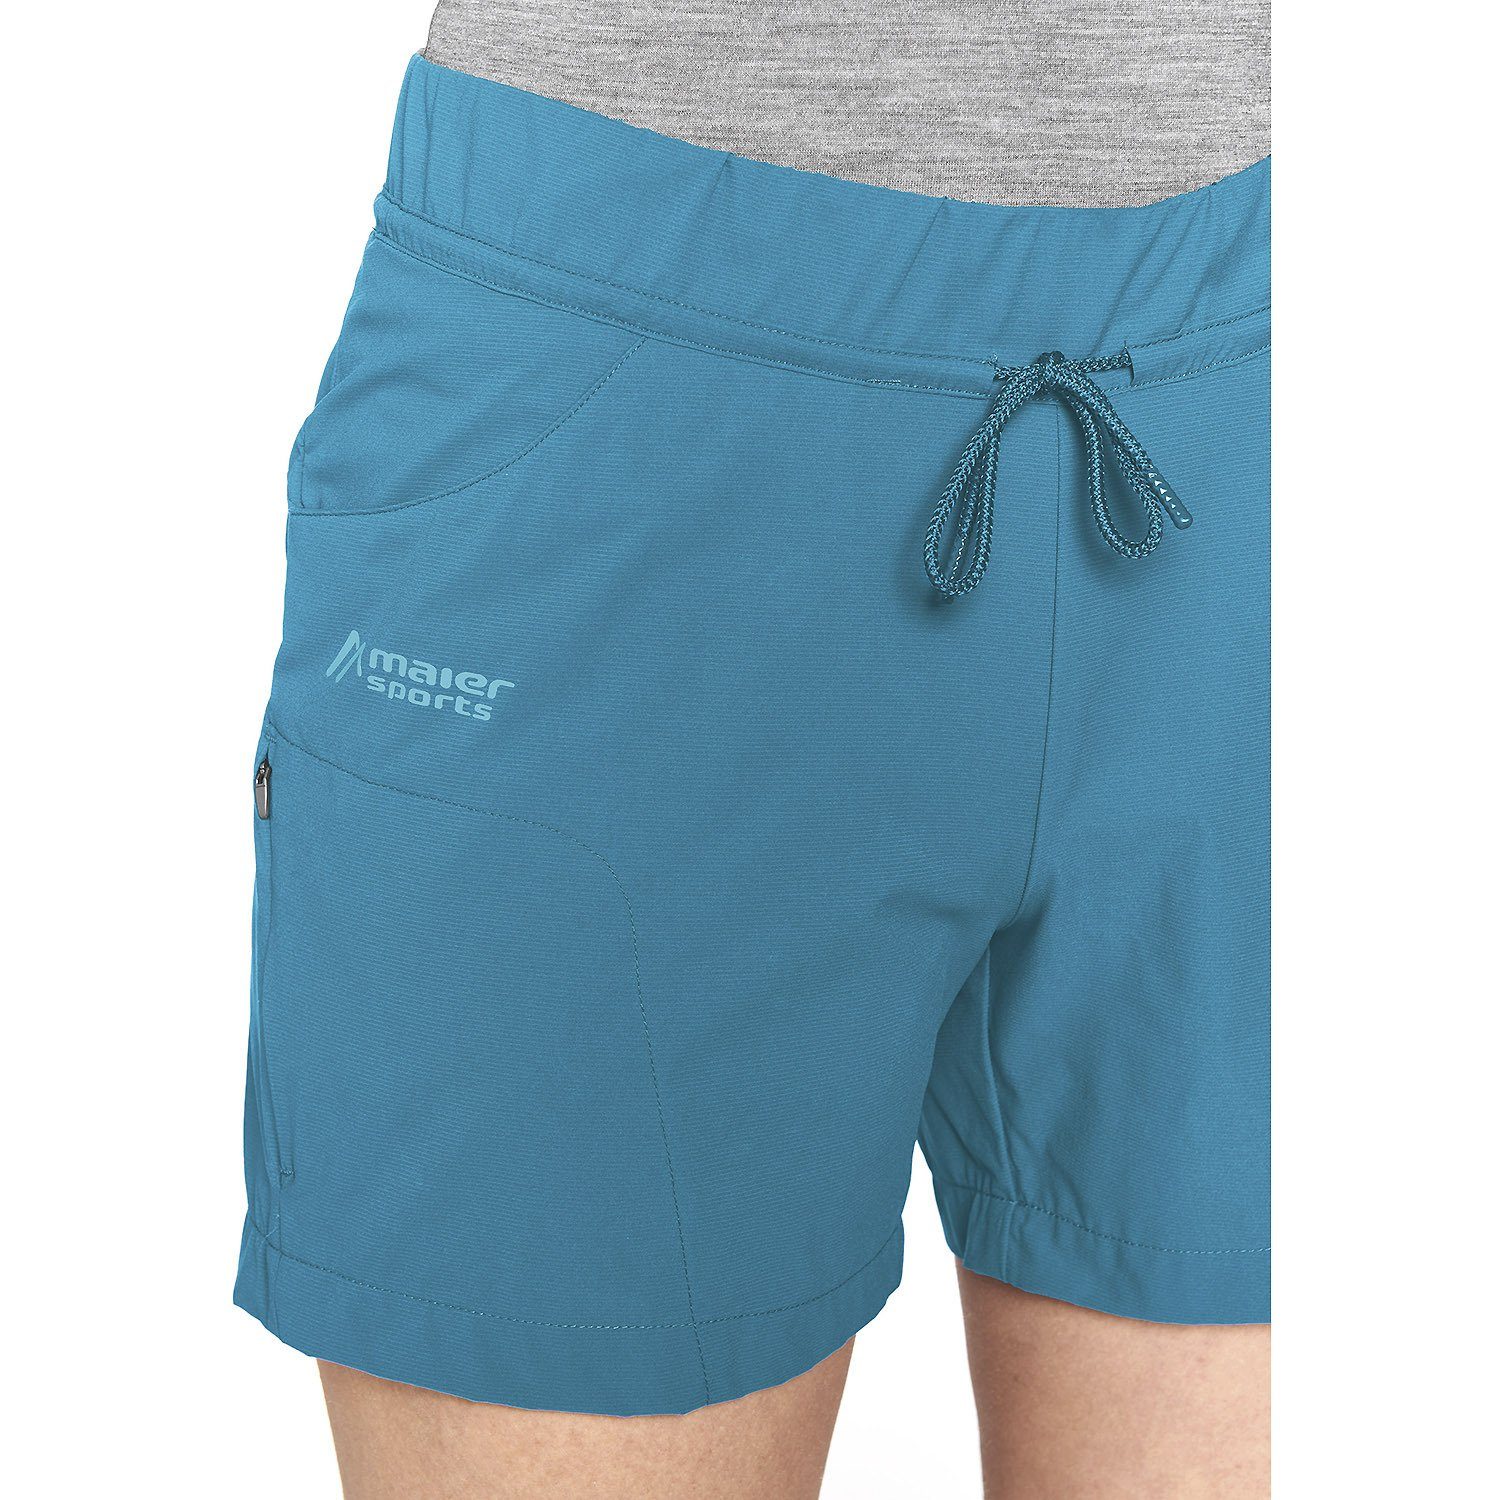 Maier Sports Petrol Fortunit Shorts Funktionsshorts